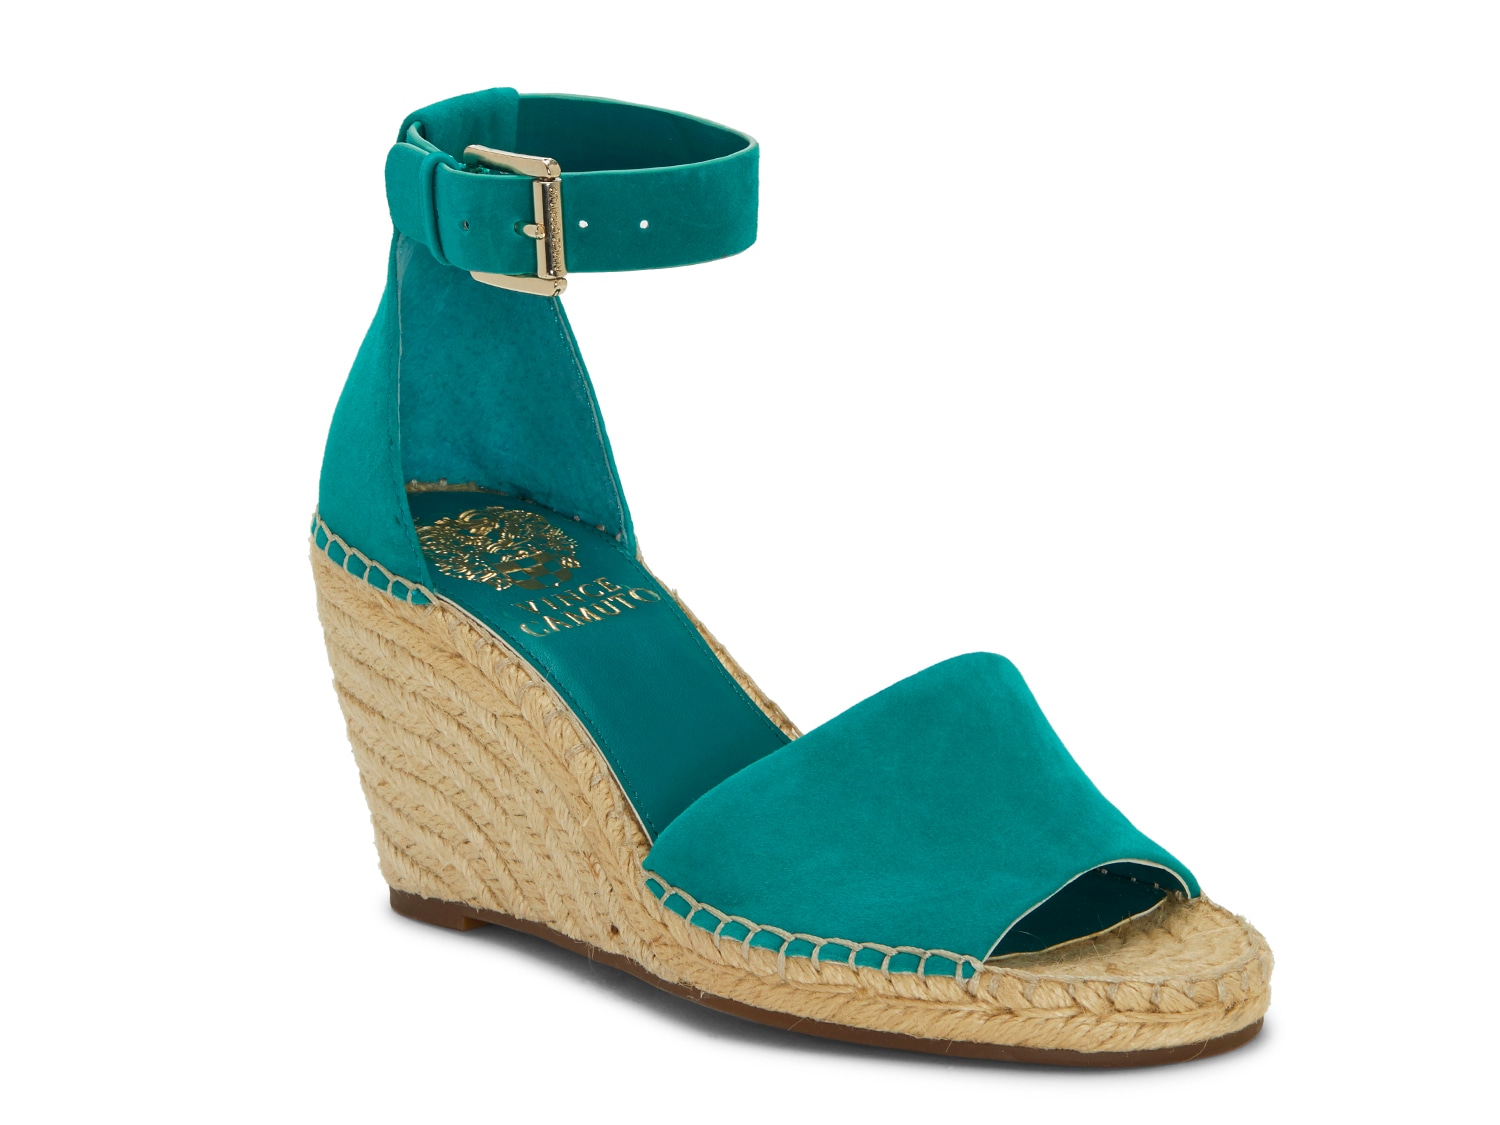 Vince Camuto Leera Espadrille Wedge Sandal - Free Shipping | DSW